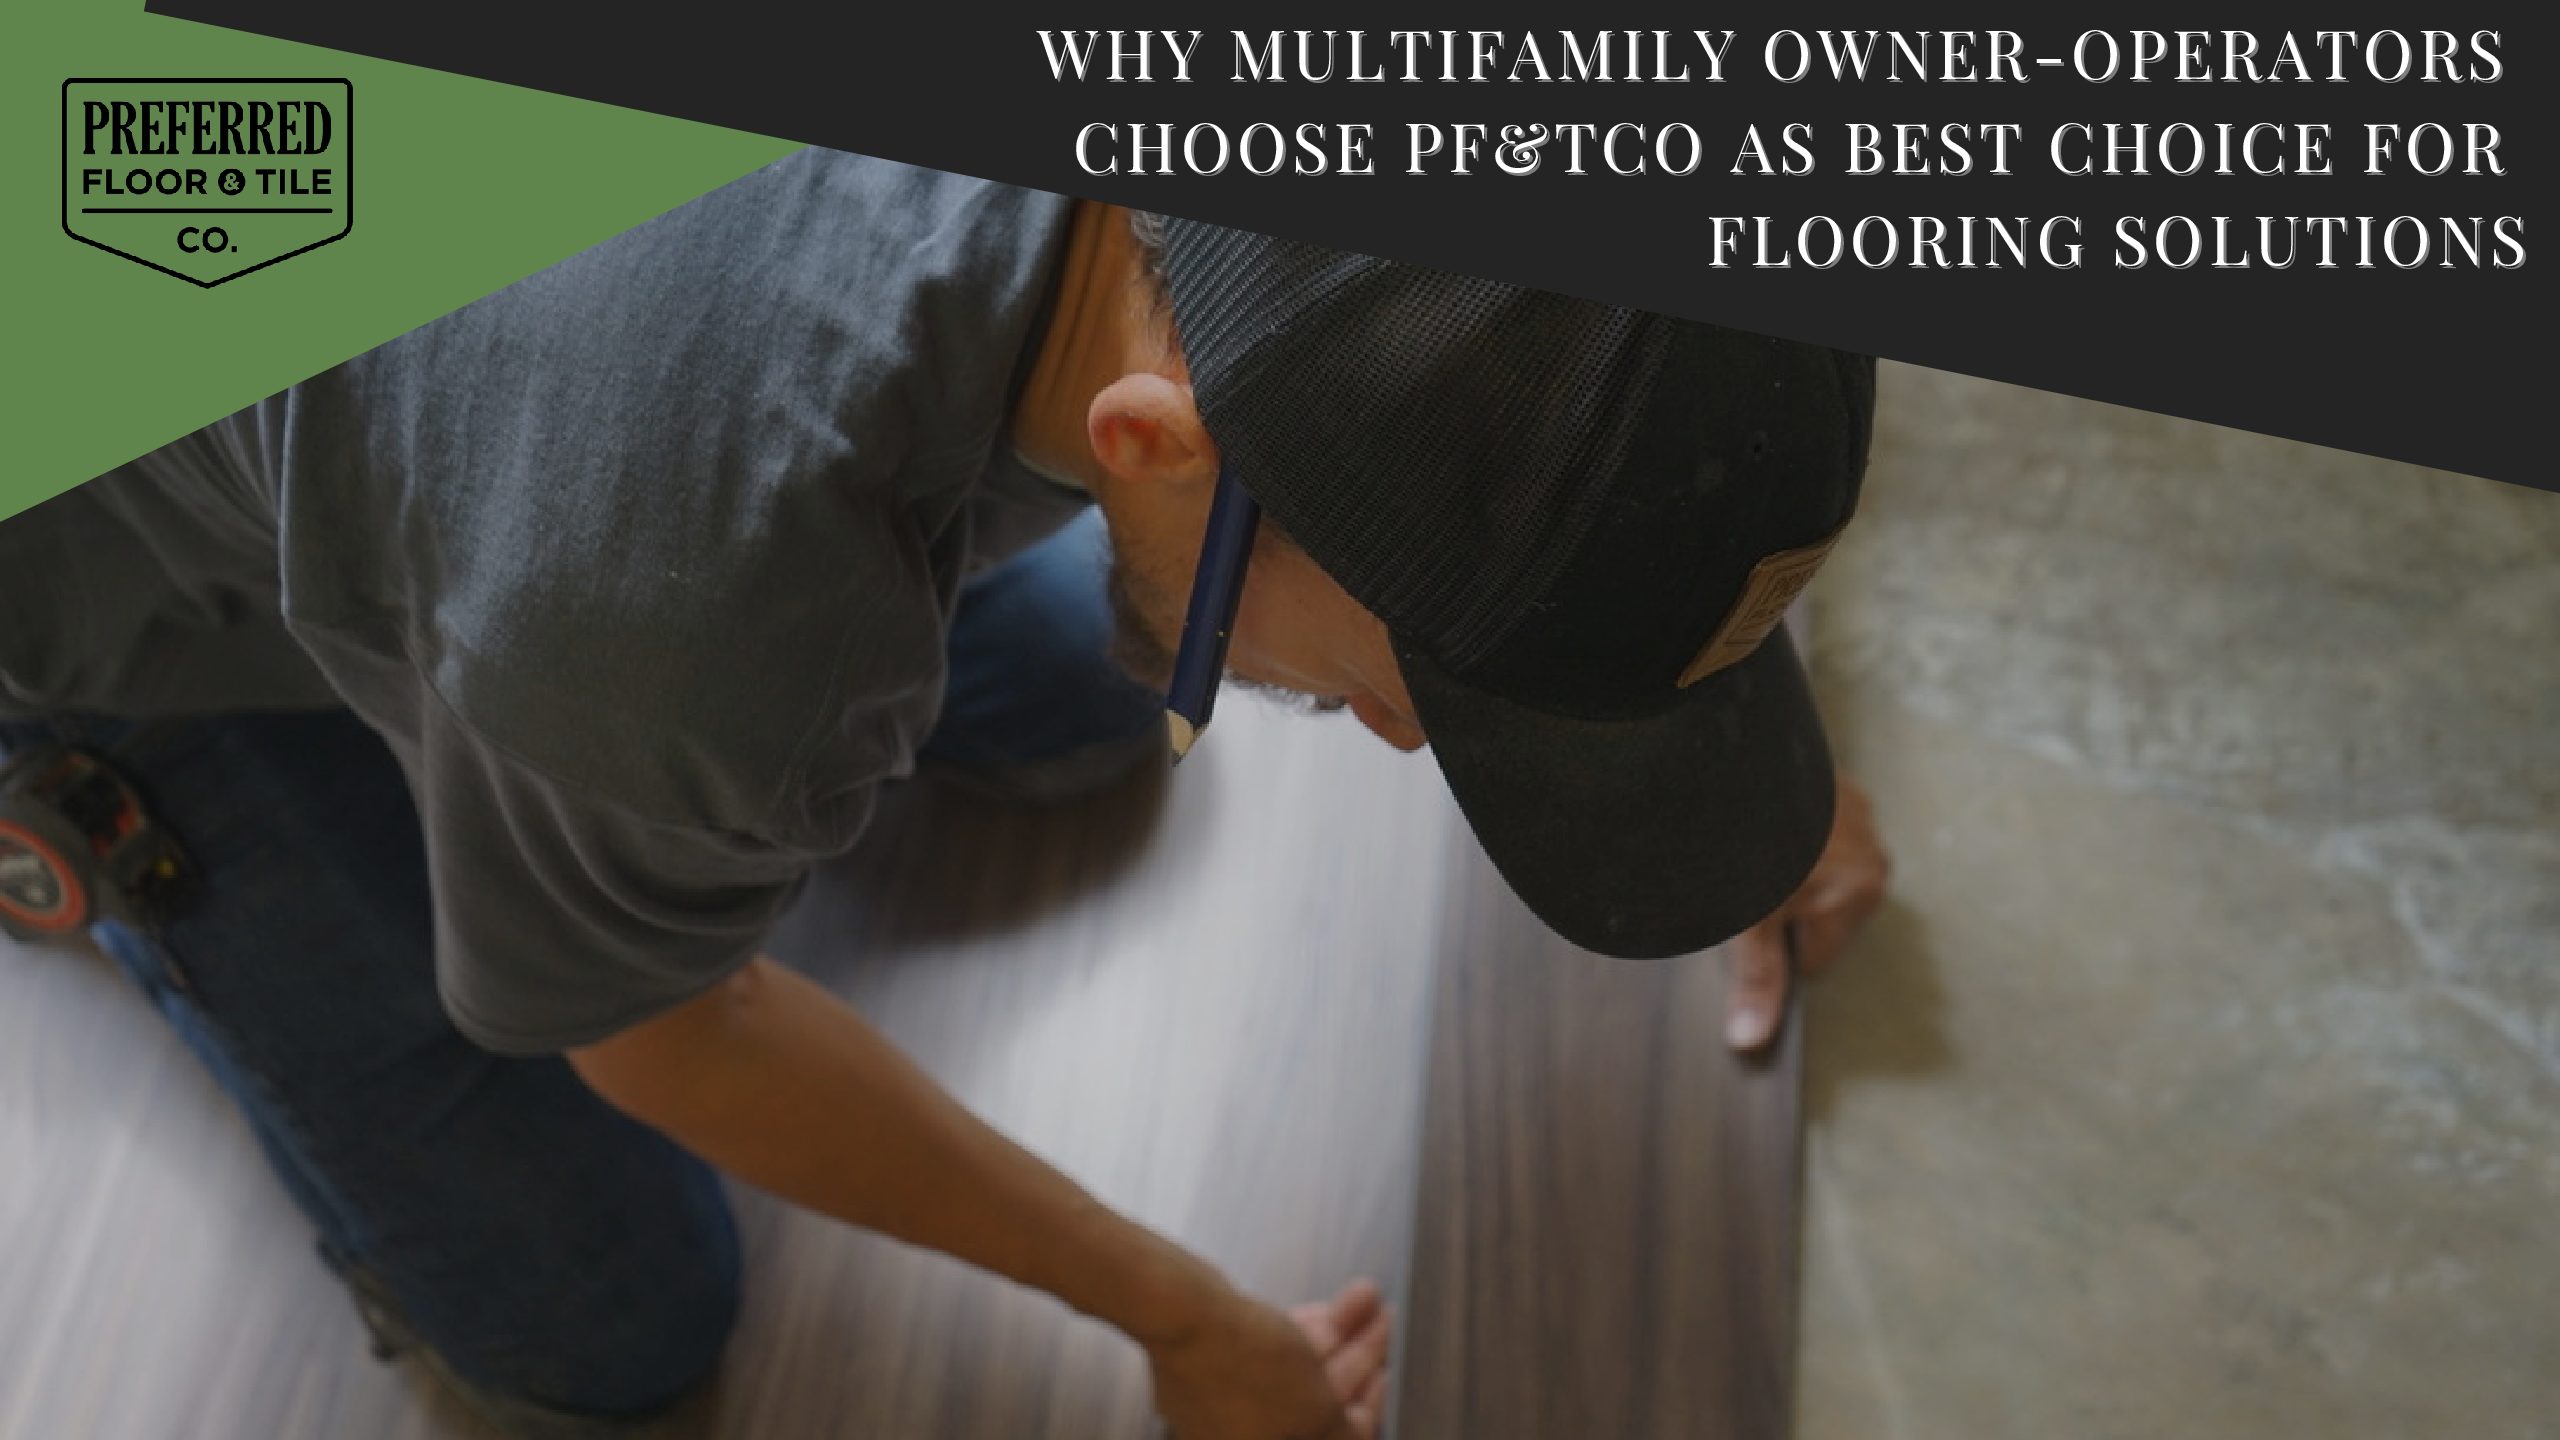 Why Multifamily Owner-Operators Choose PF&TCO as Best Choice for Flooring Solutions